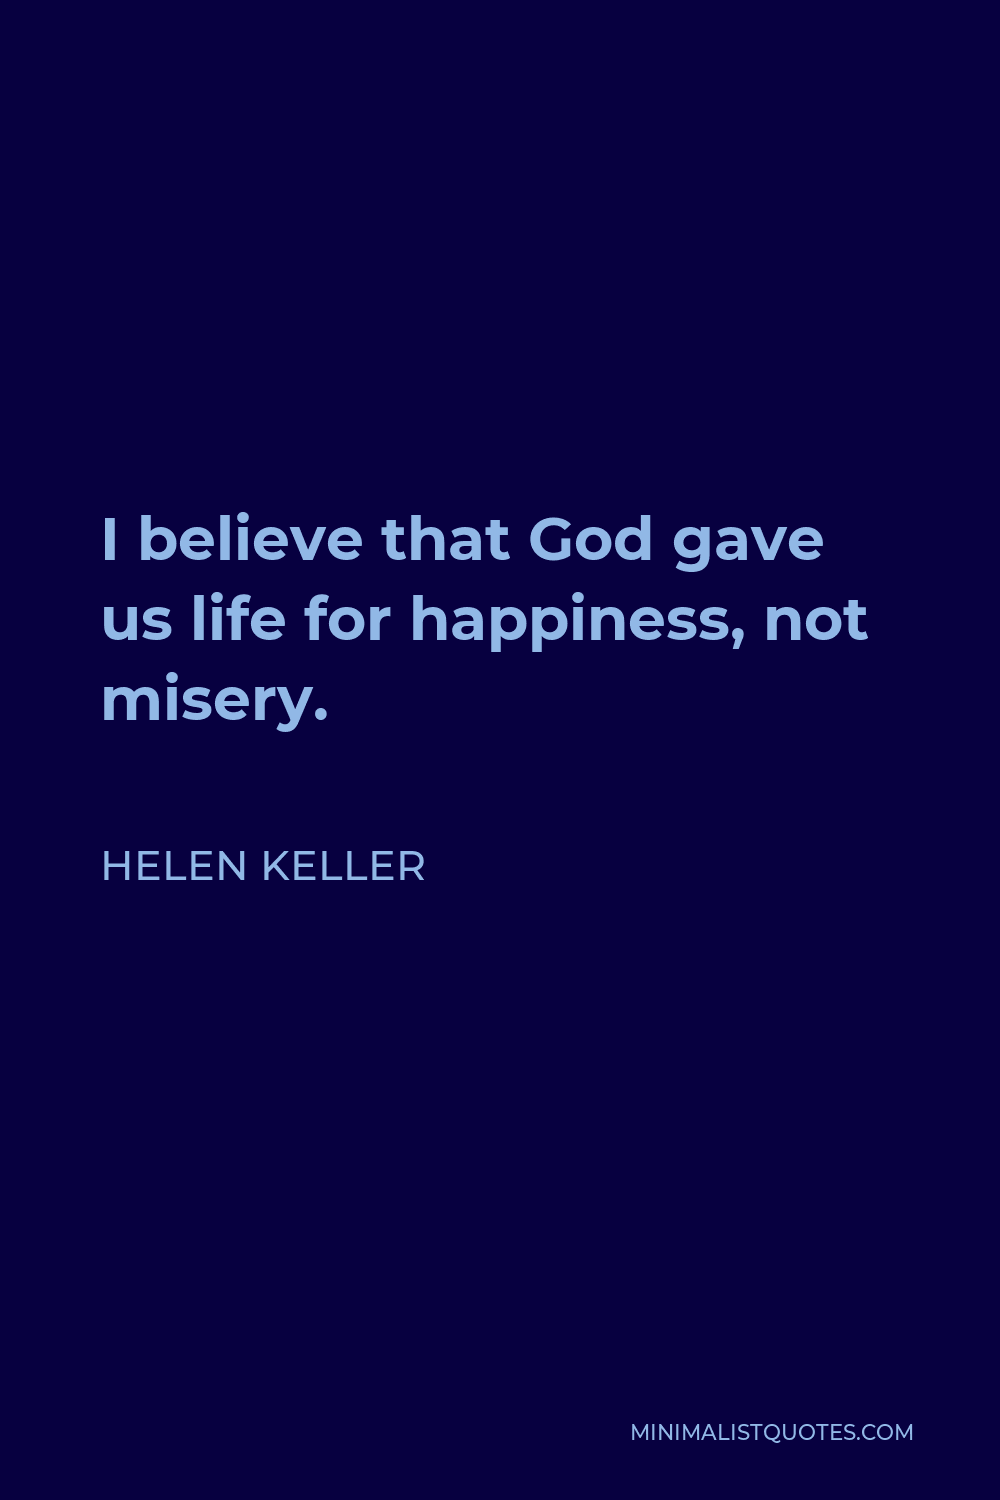 Helen Keller Quote - I believe that God gave us life for happiness, not misery.